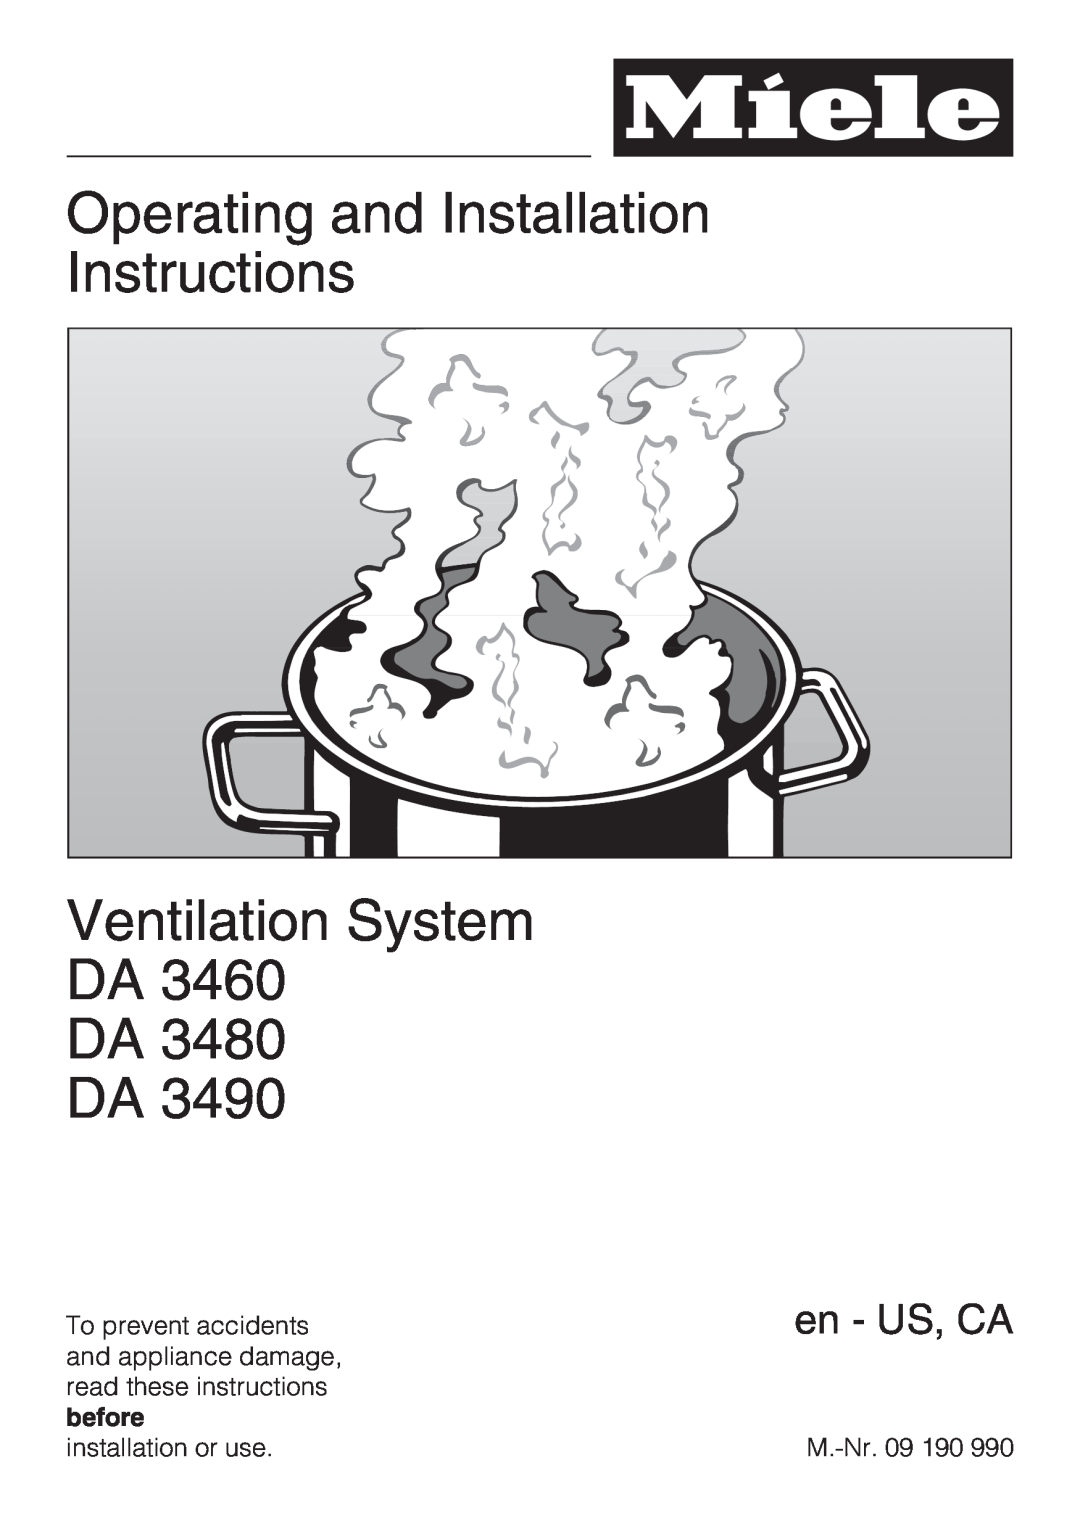 Miele dimensions Product and Cut-outDimensions, Page 1 of, DA 3480 Built-InHoods, Location Codes 